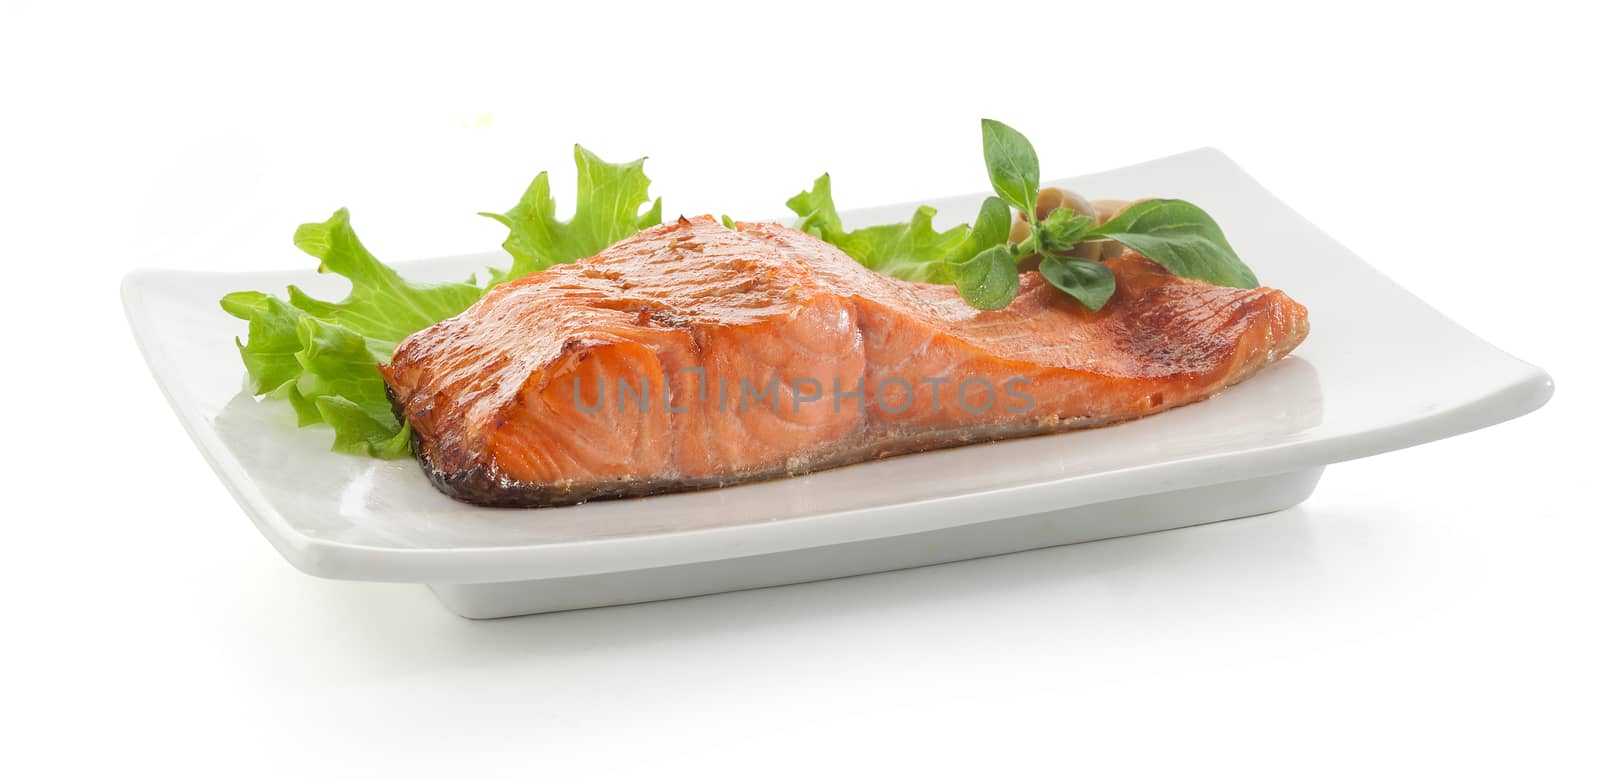 Baked fillet of trout with lettuce and basil on the plate